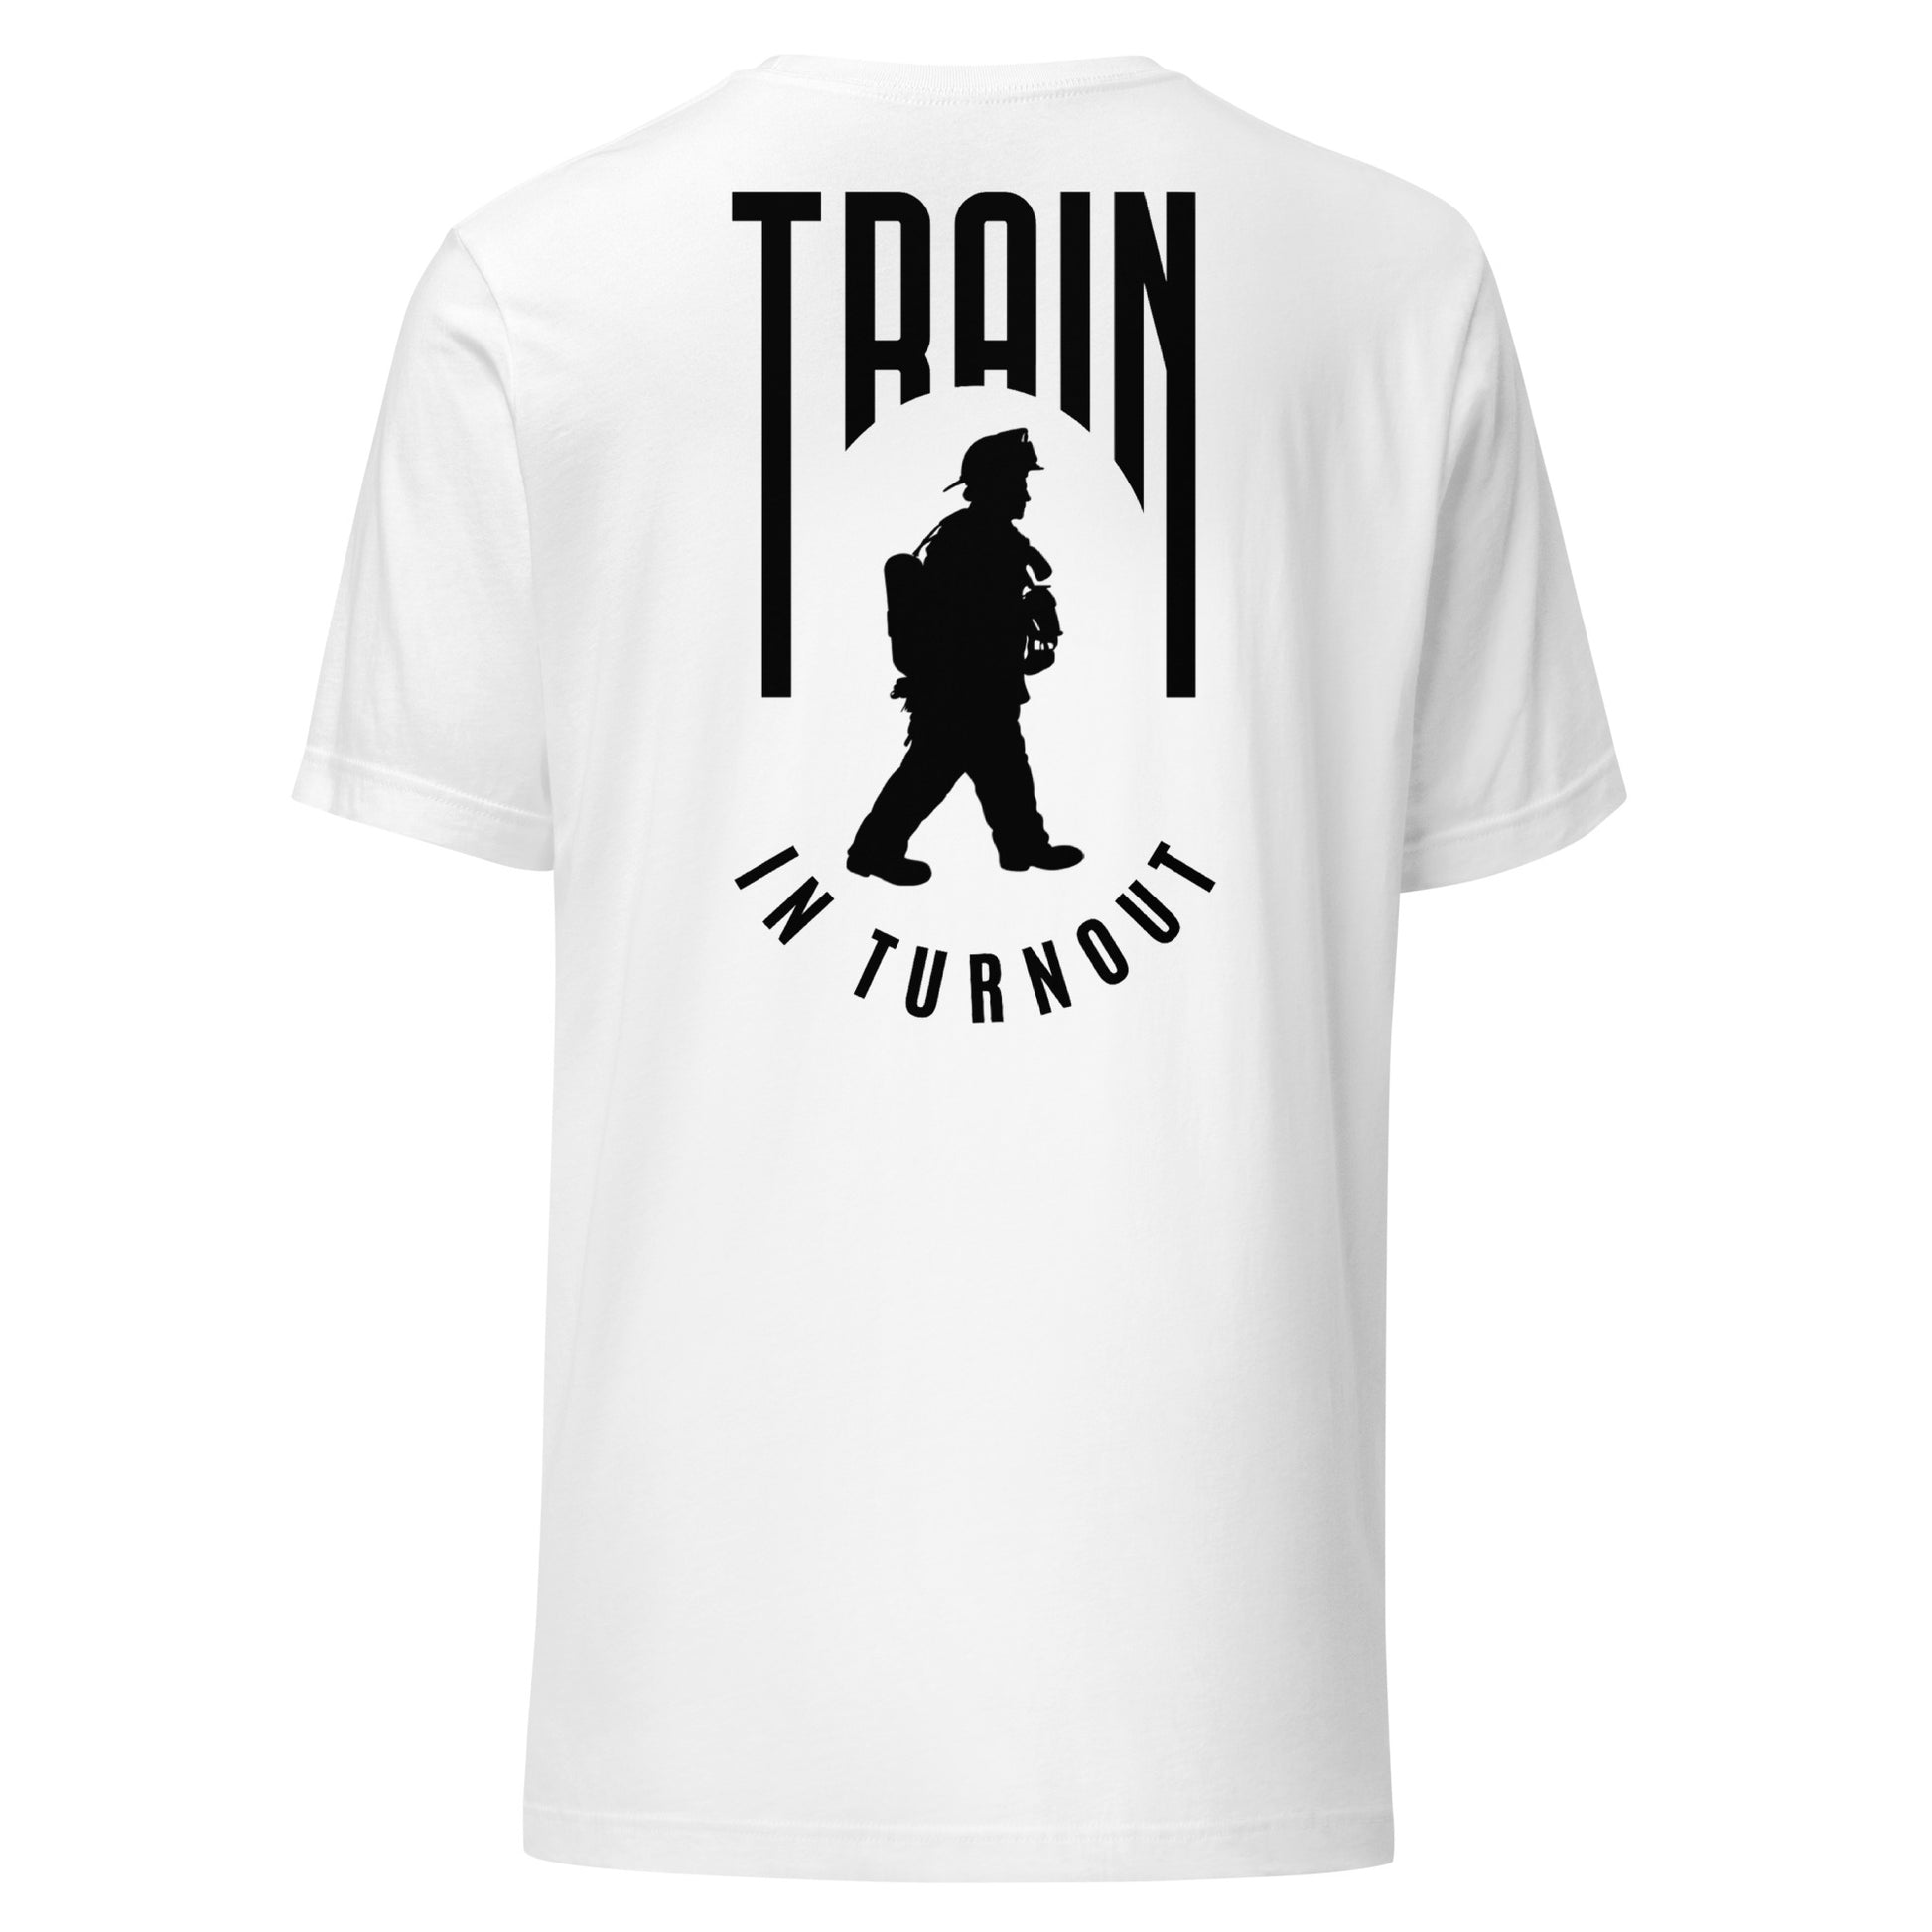 Train in Turnout Graphic Firefighter shirt, White and Black.  